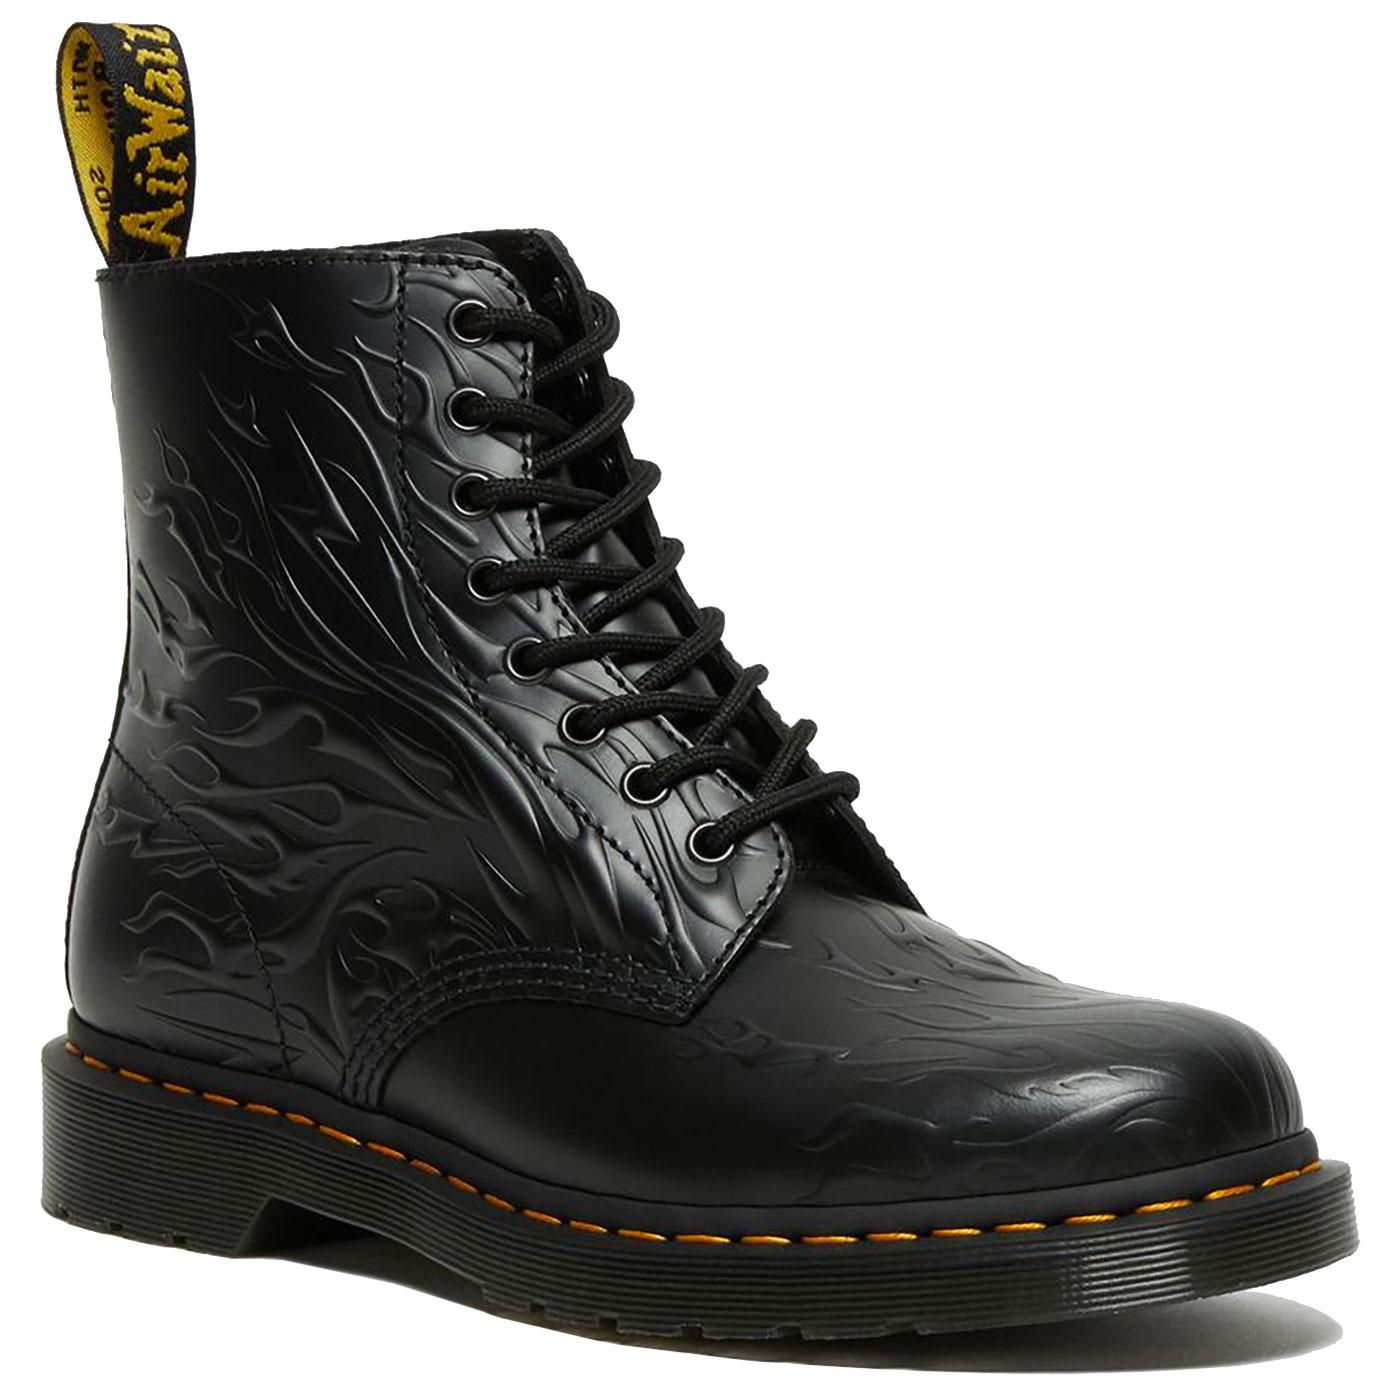 1460 DR MARTENS Womens Flame Embossed Retro Boots